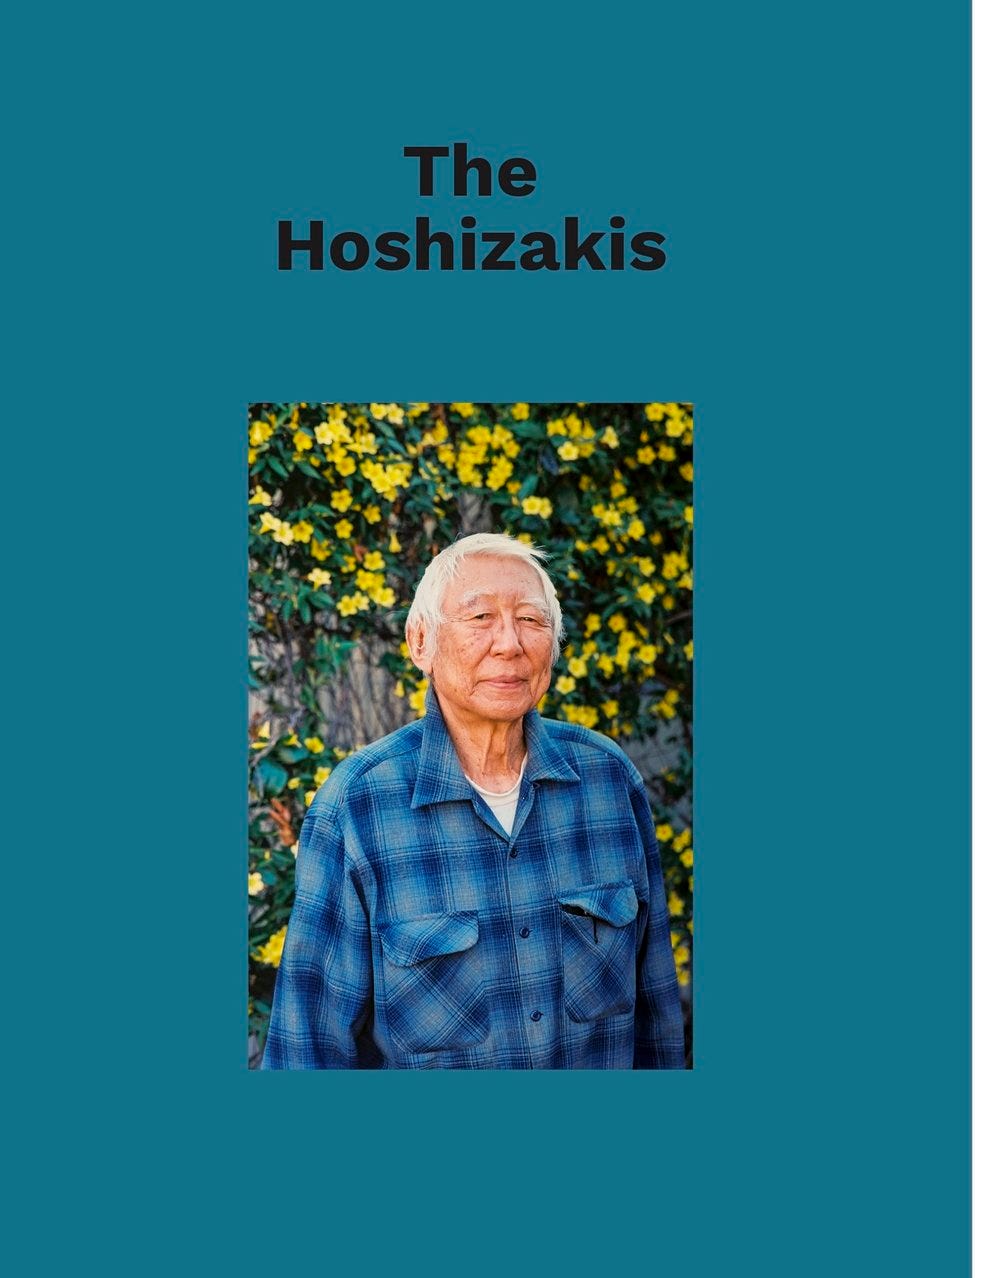 Image of a title page from the magazine that says “the Hoshizakis” above a color photo of a 97 year old Japanese American man, Takashi Hoshizaki, standing in front of a yellow flower bush